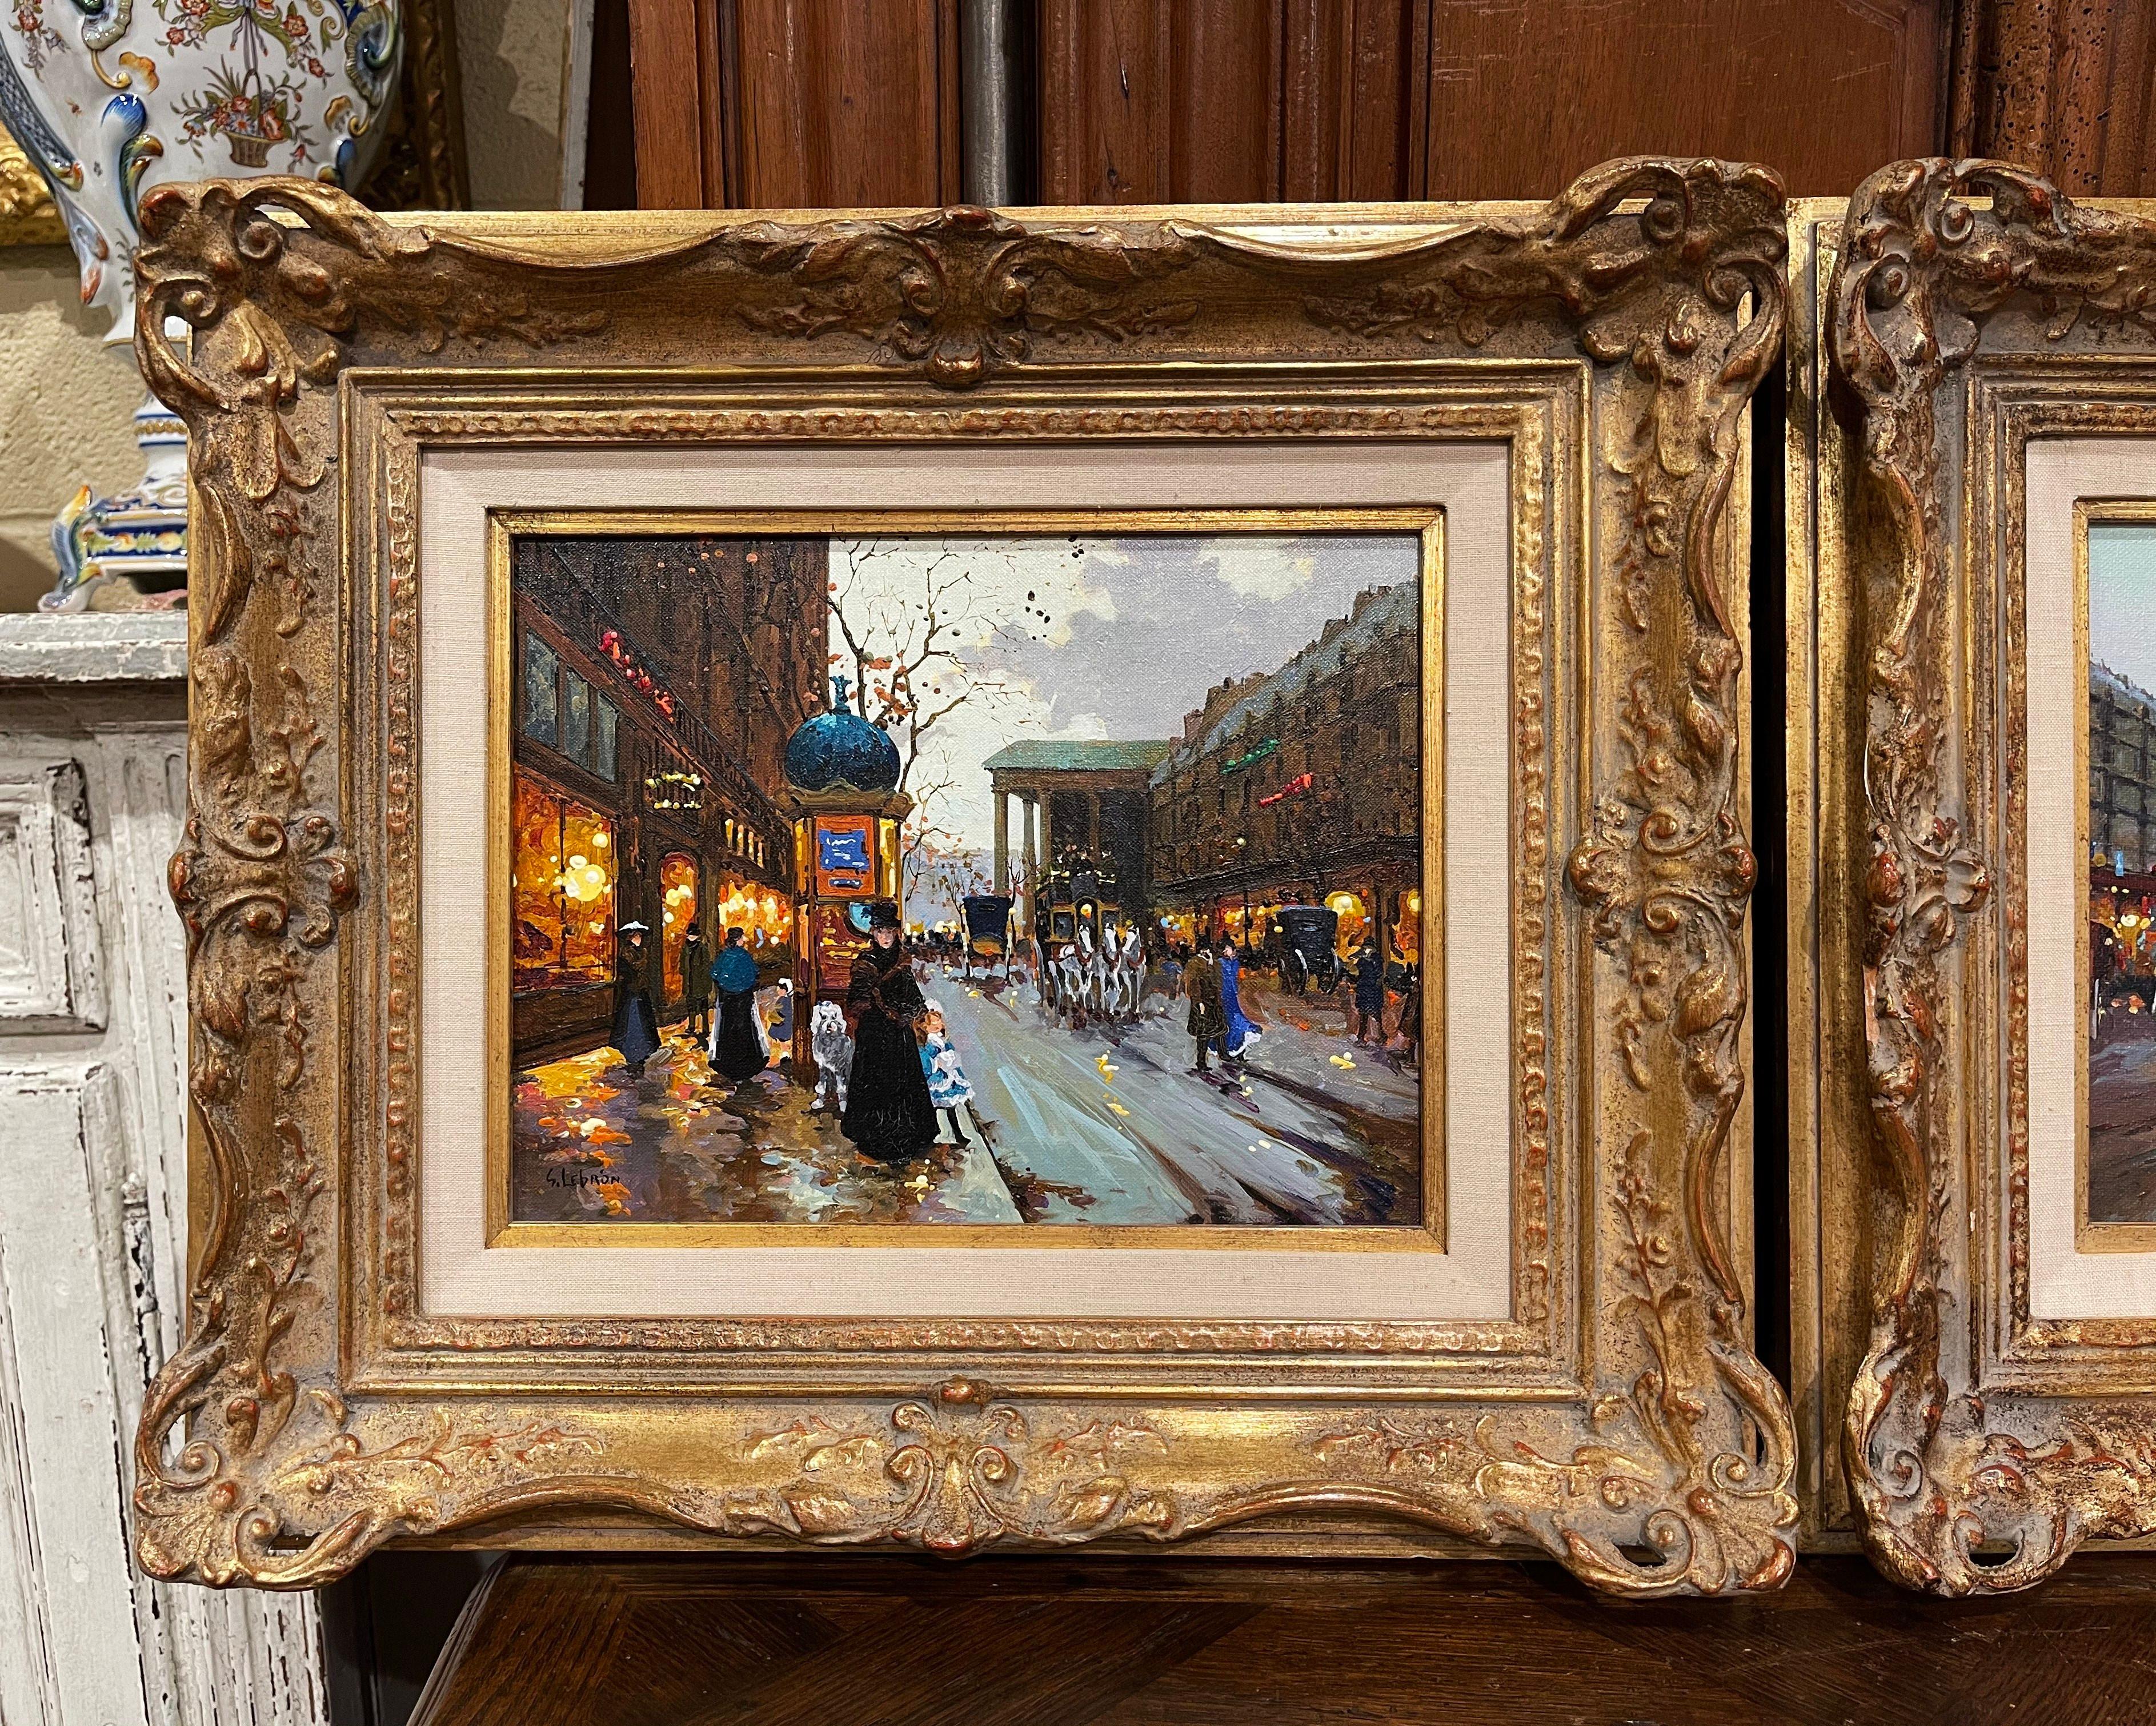 Set in carved gilt wood frames and signed in the lower right and left corner by american artist Robert Lebron, each mid-century art work is painted on canvas and depicts a typical Parisian scene in the style of Edouard Cortes or Galien Laloue. One